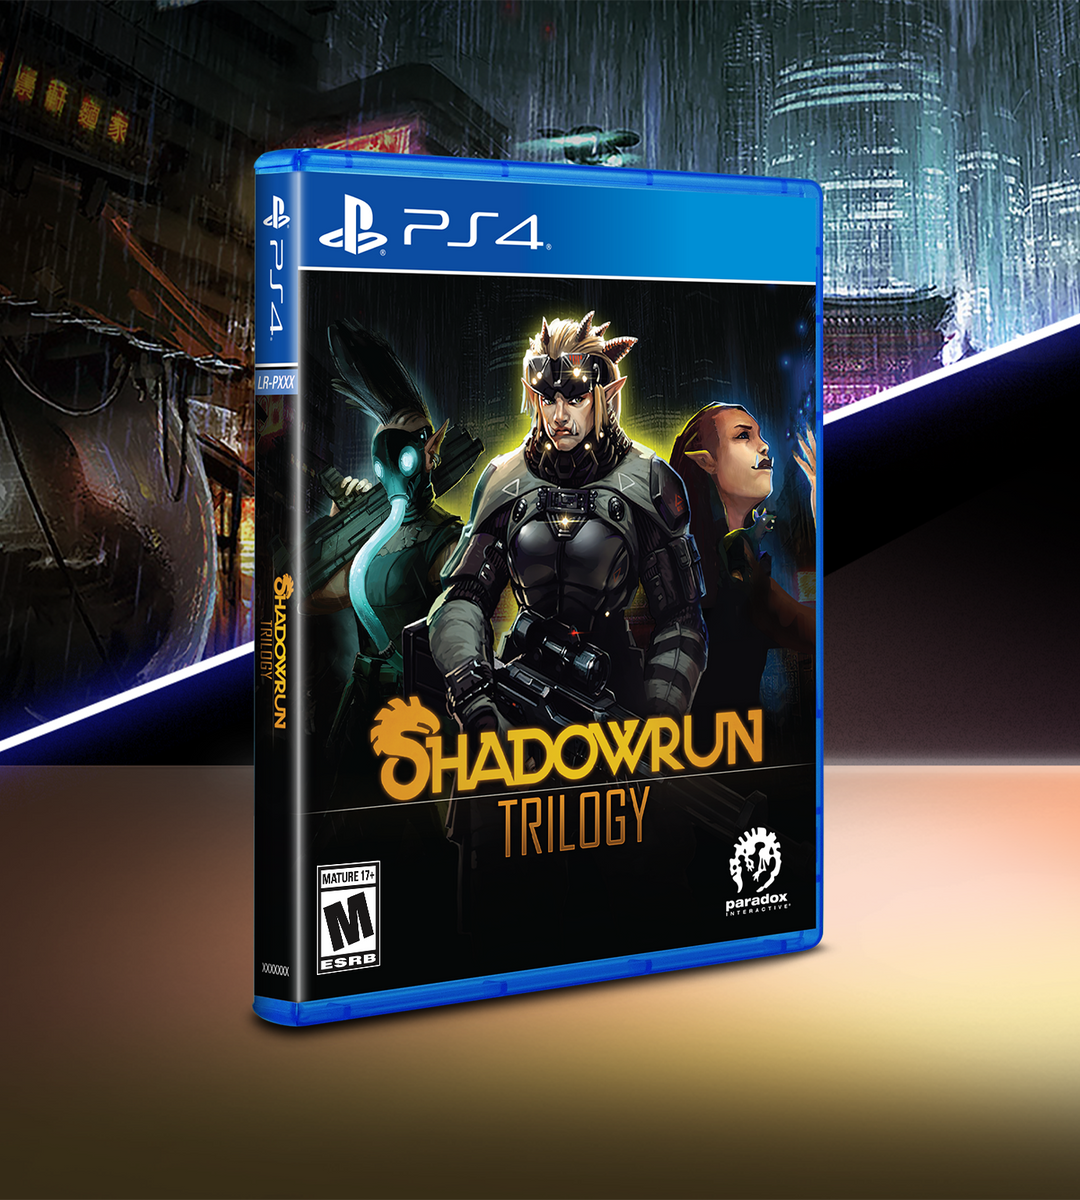 Shadowrun Trilogy Is Now Available For Xbox One And Xbox Series X